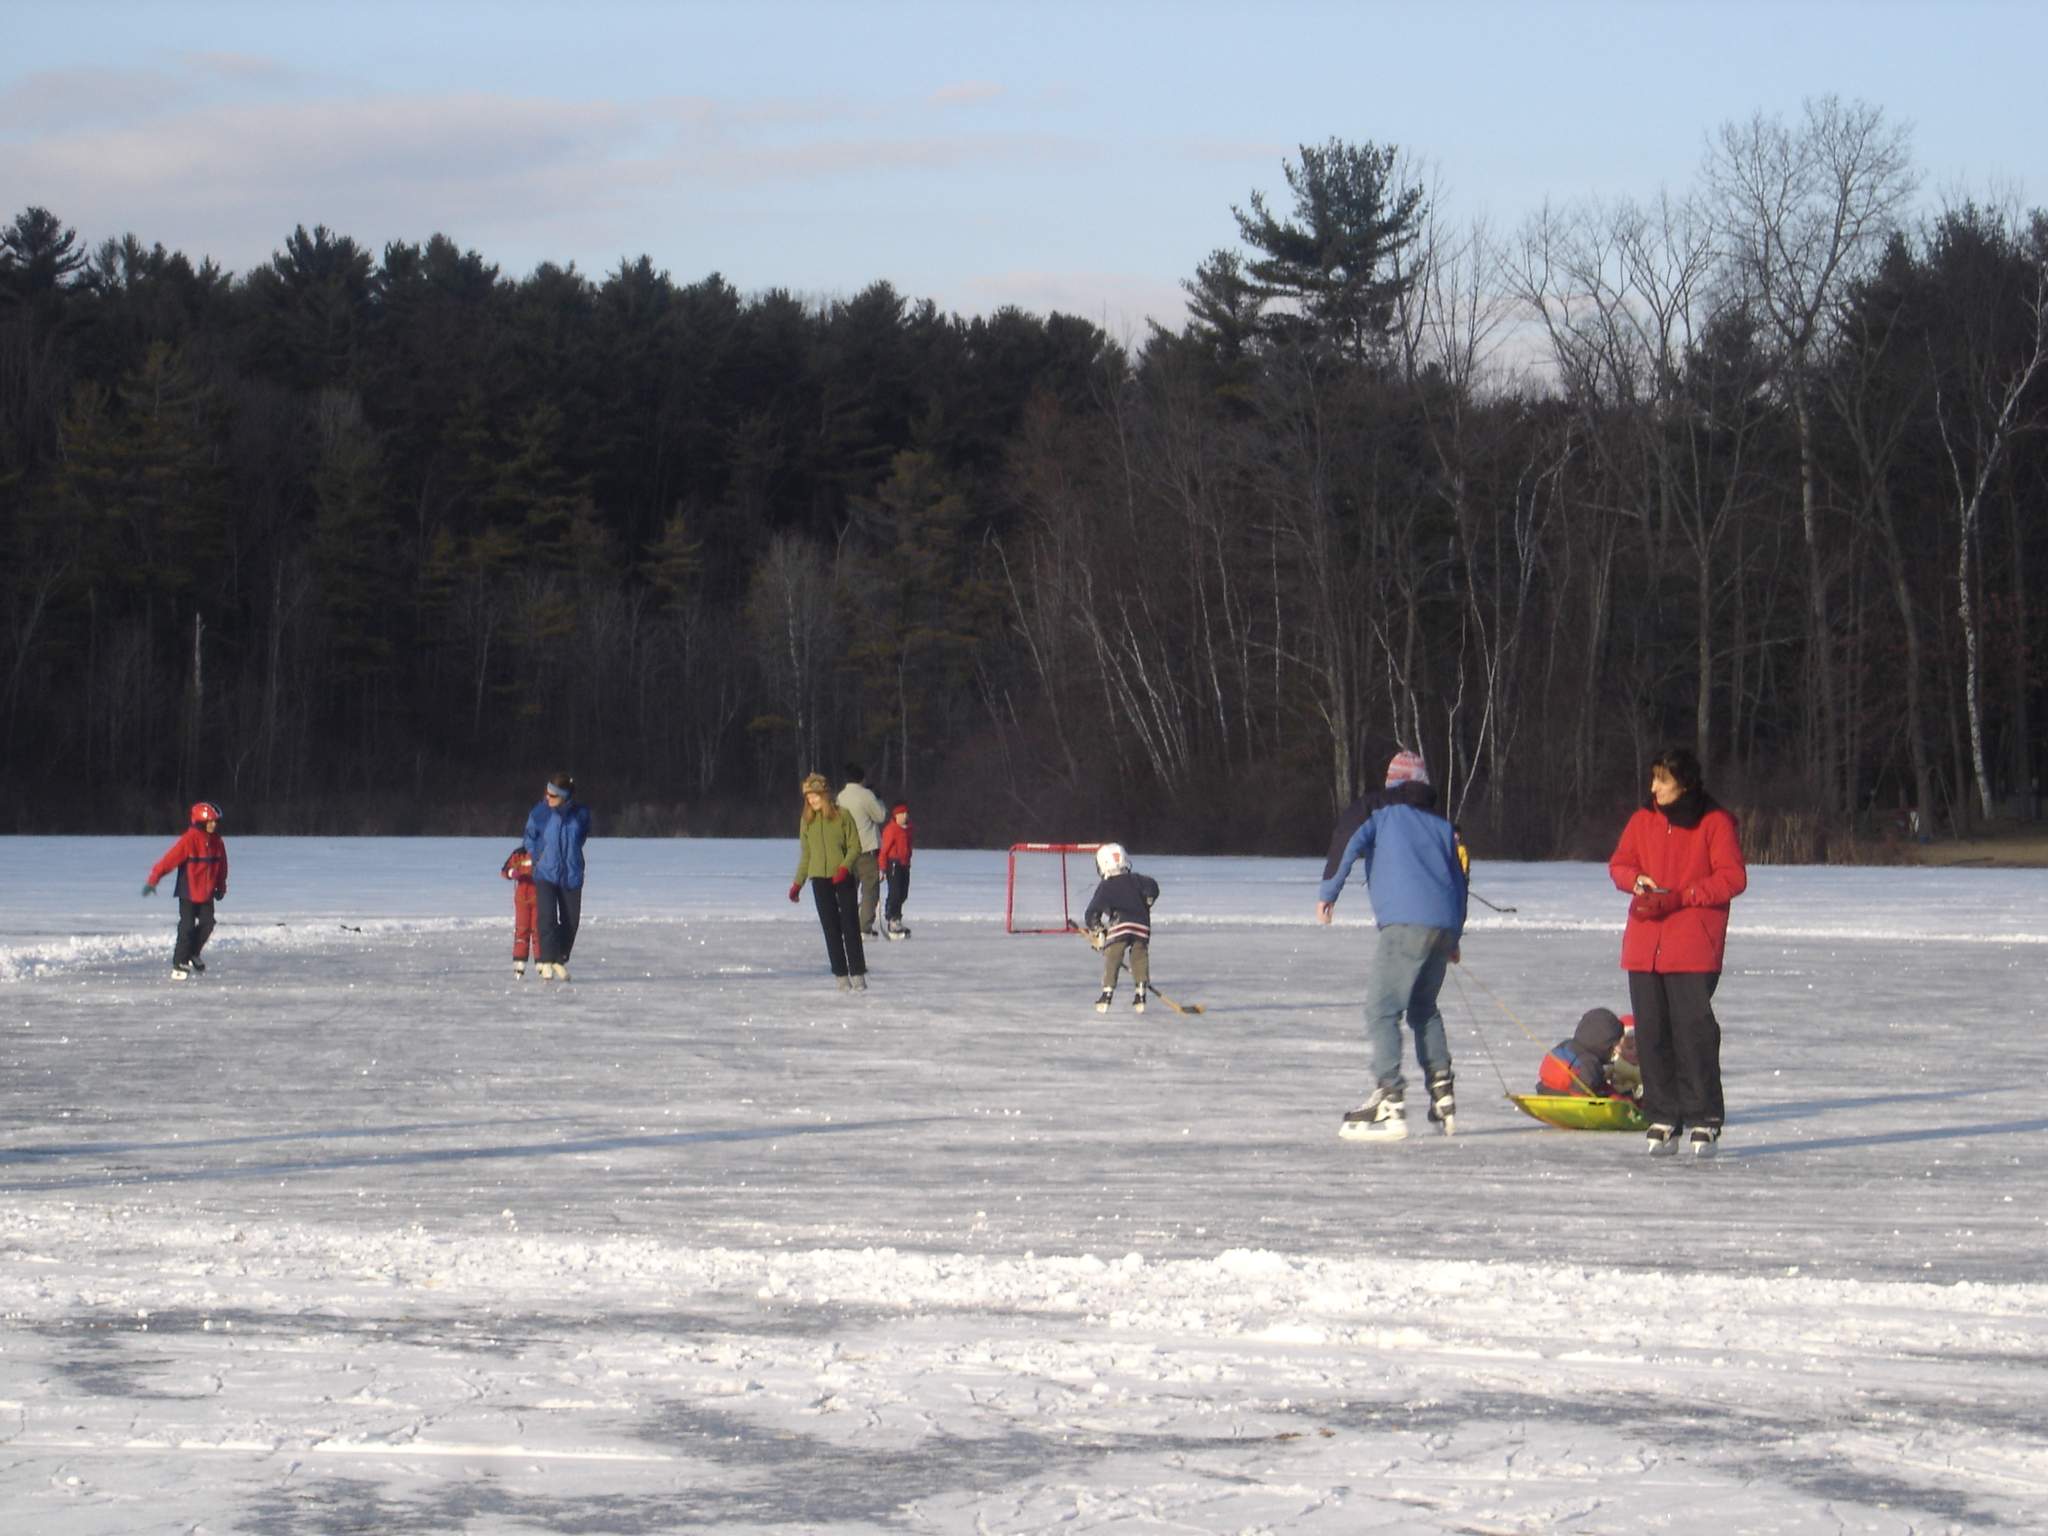 Winter activities are fun at Lake Mansfield in Great Barrington MA 